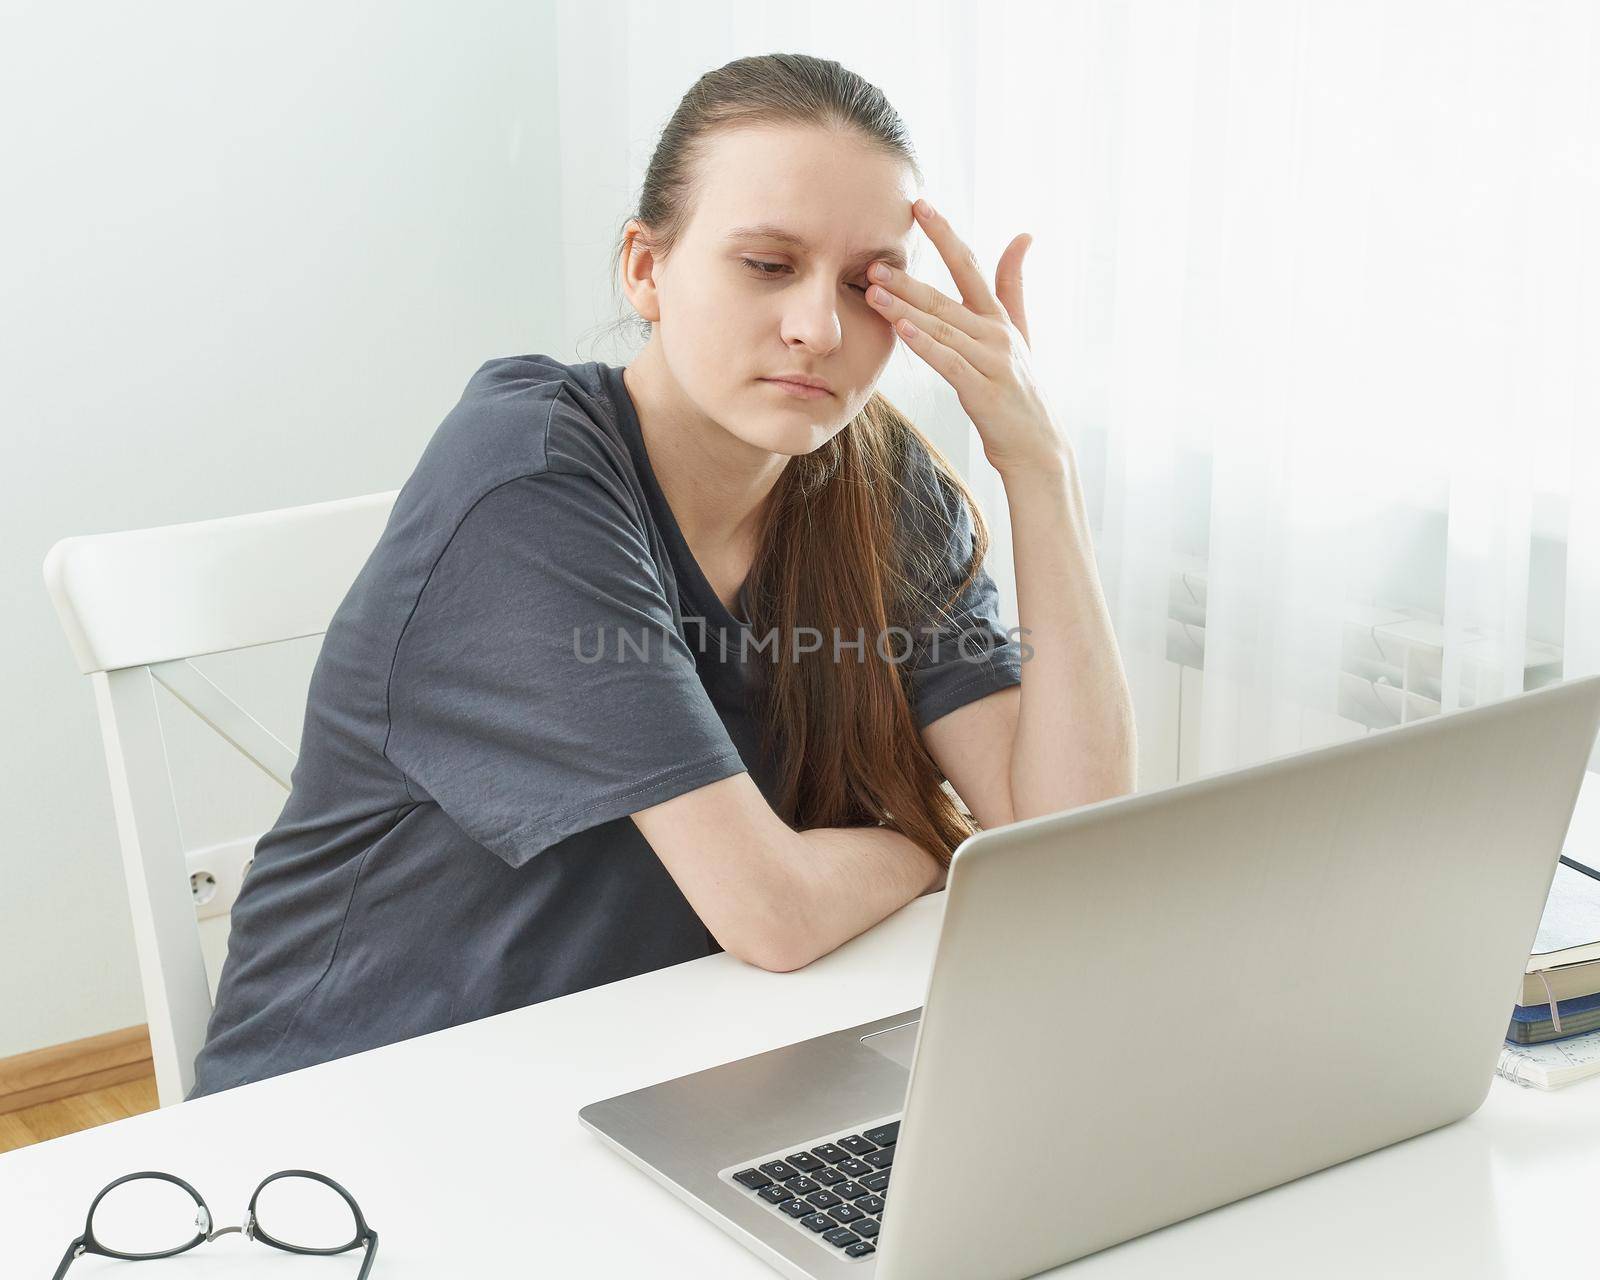 Girl rubs her eyes, her eyes are tired from the strain and hurt. Concept of harmful effects of the computer on vision. Distance education for students. Quarantine, self-isolation, socio phobia